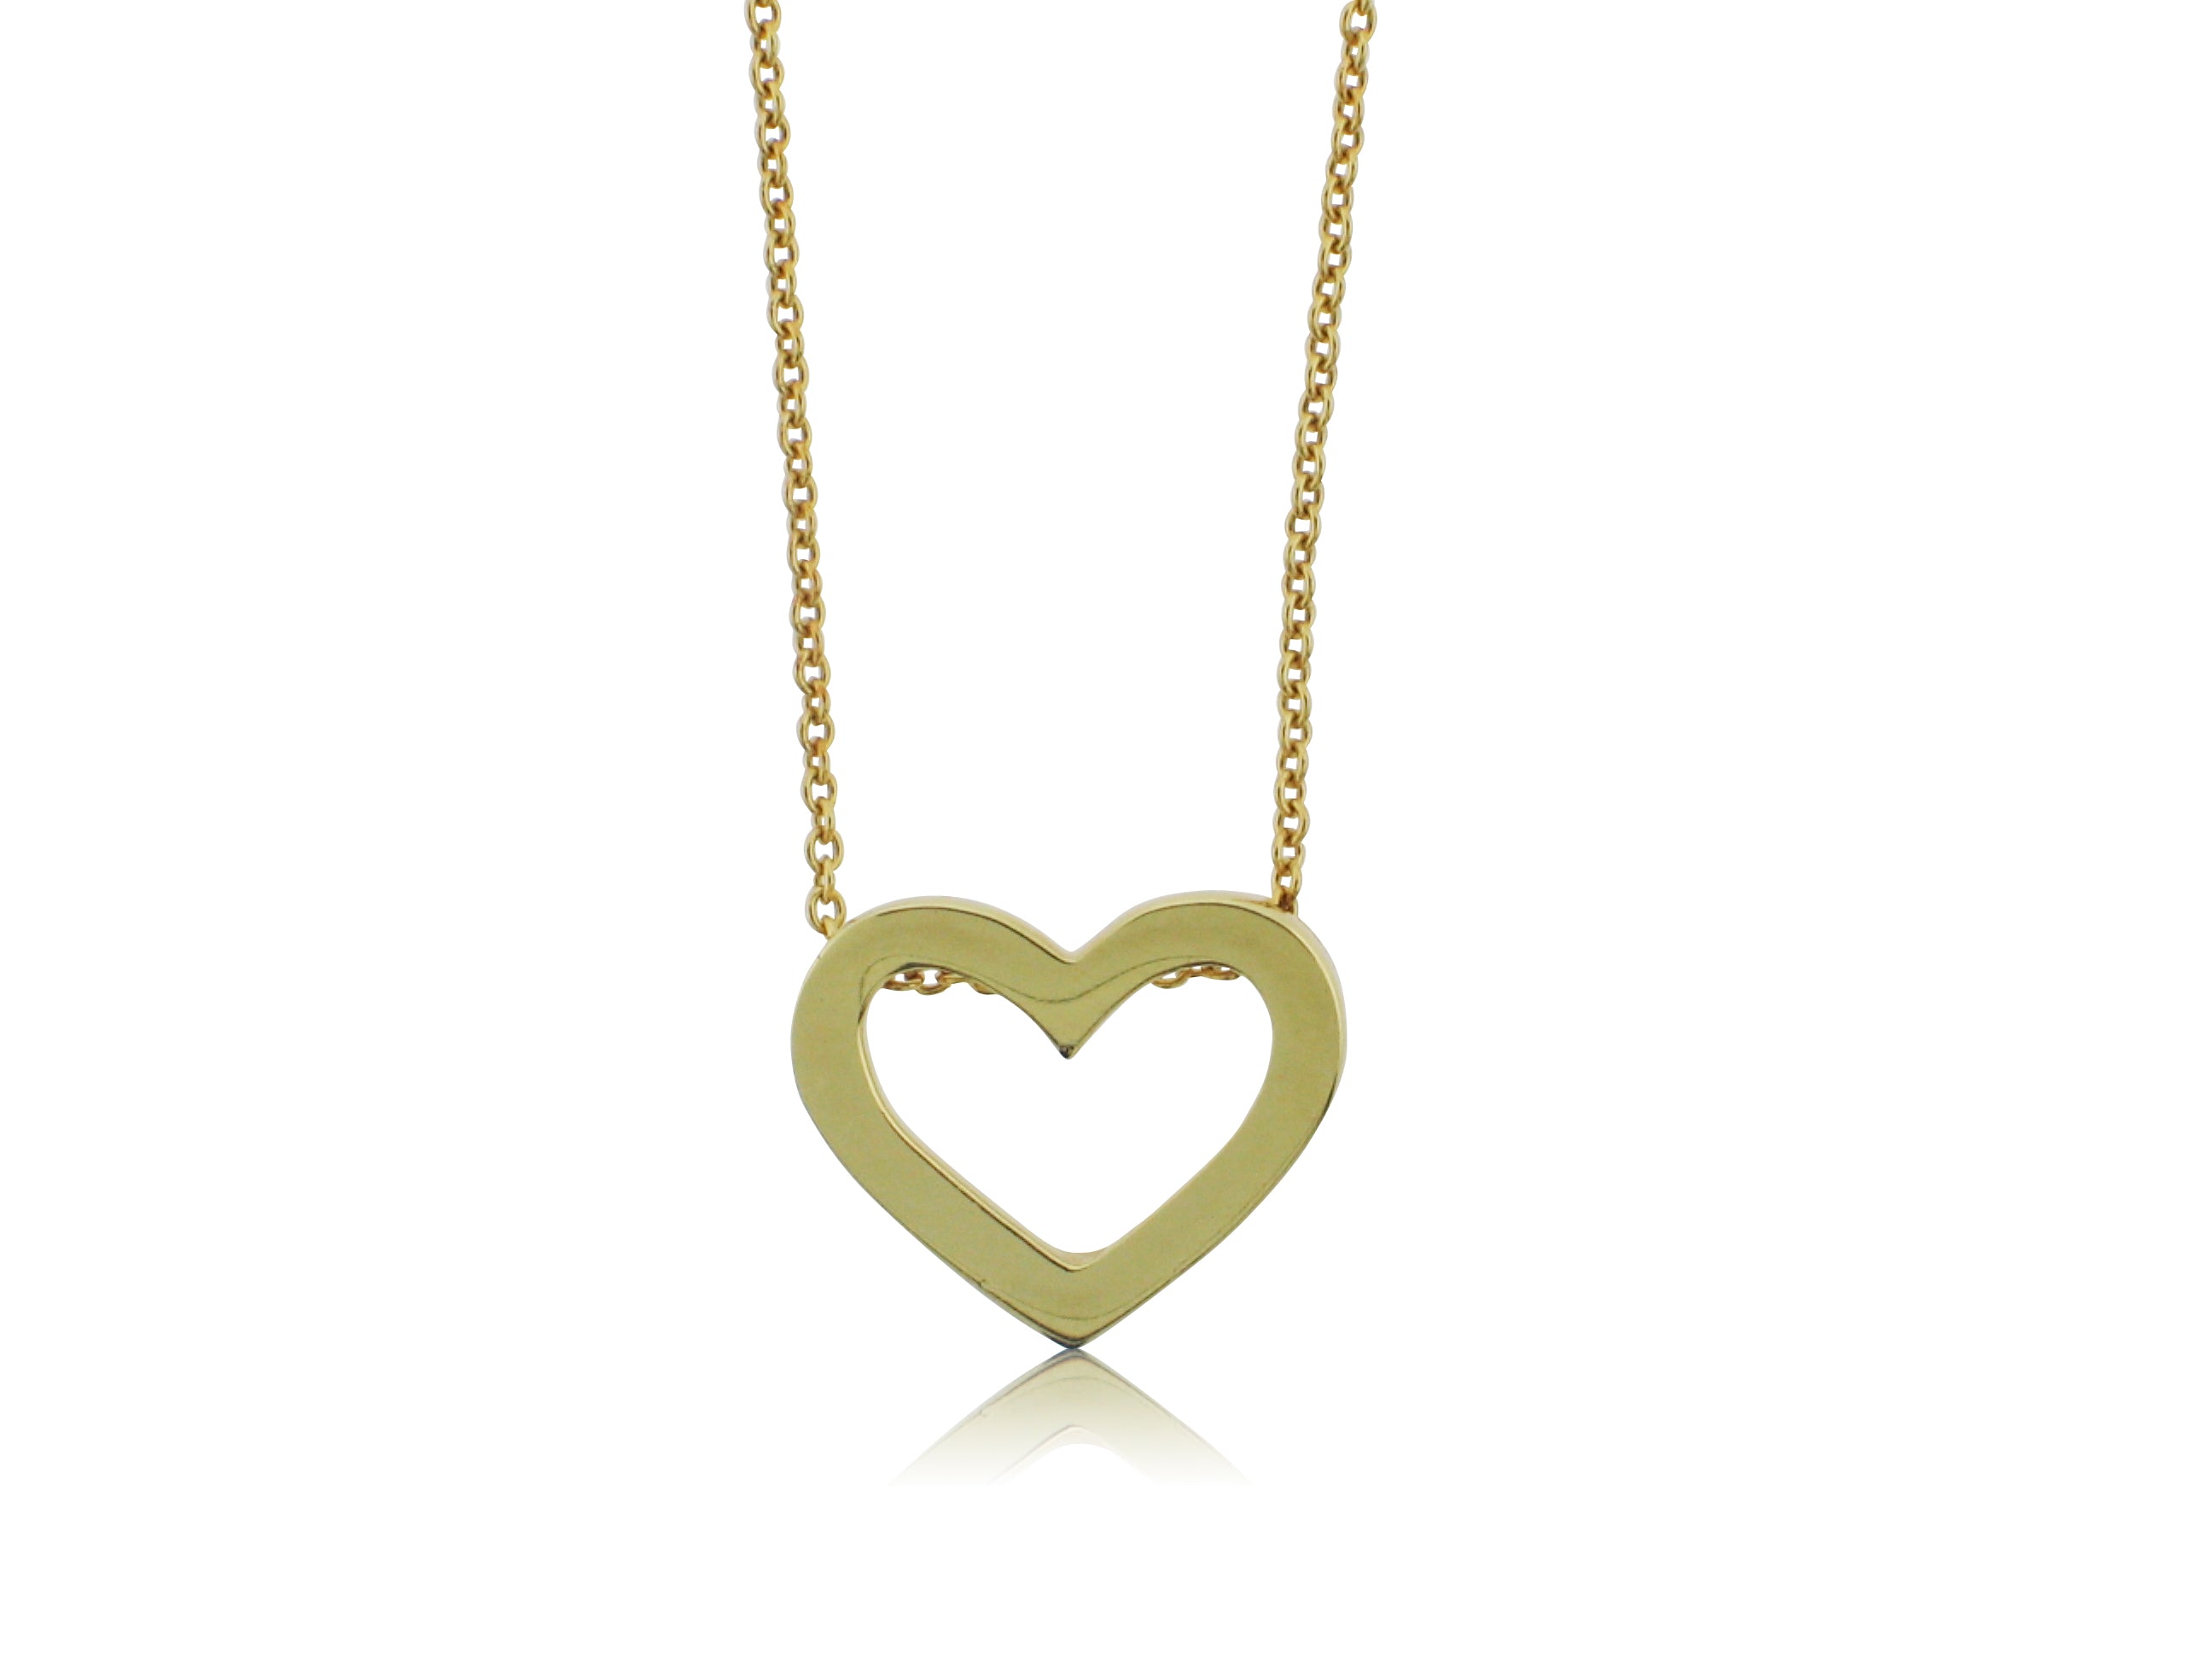 ROBERTO COIN 18K YELLOW GOLD HEART NECKLACE FROM THE GOLD COLLECTION